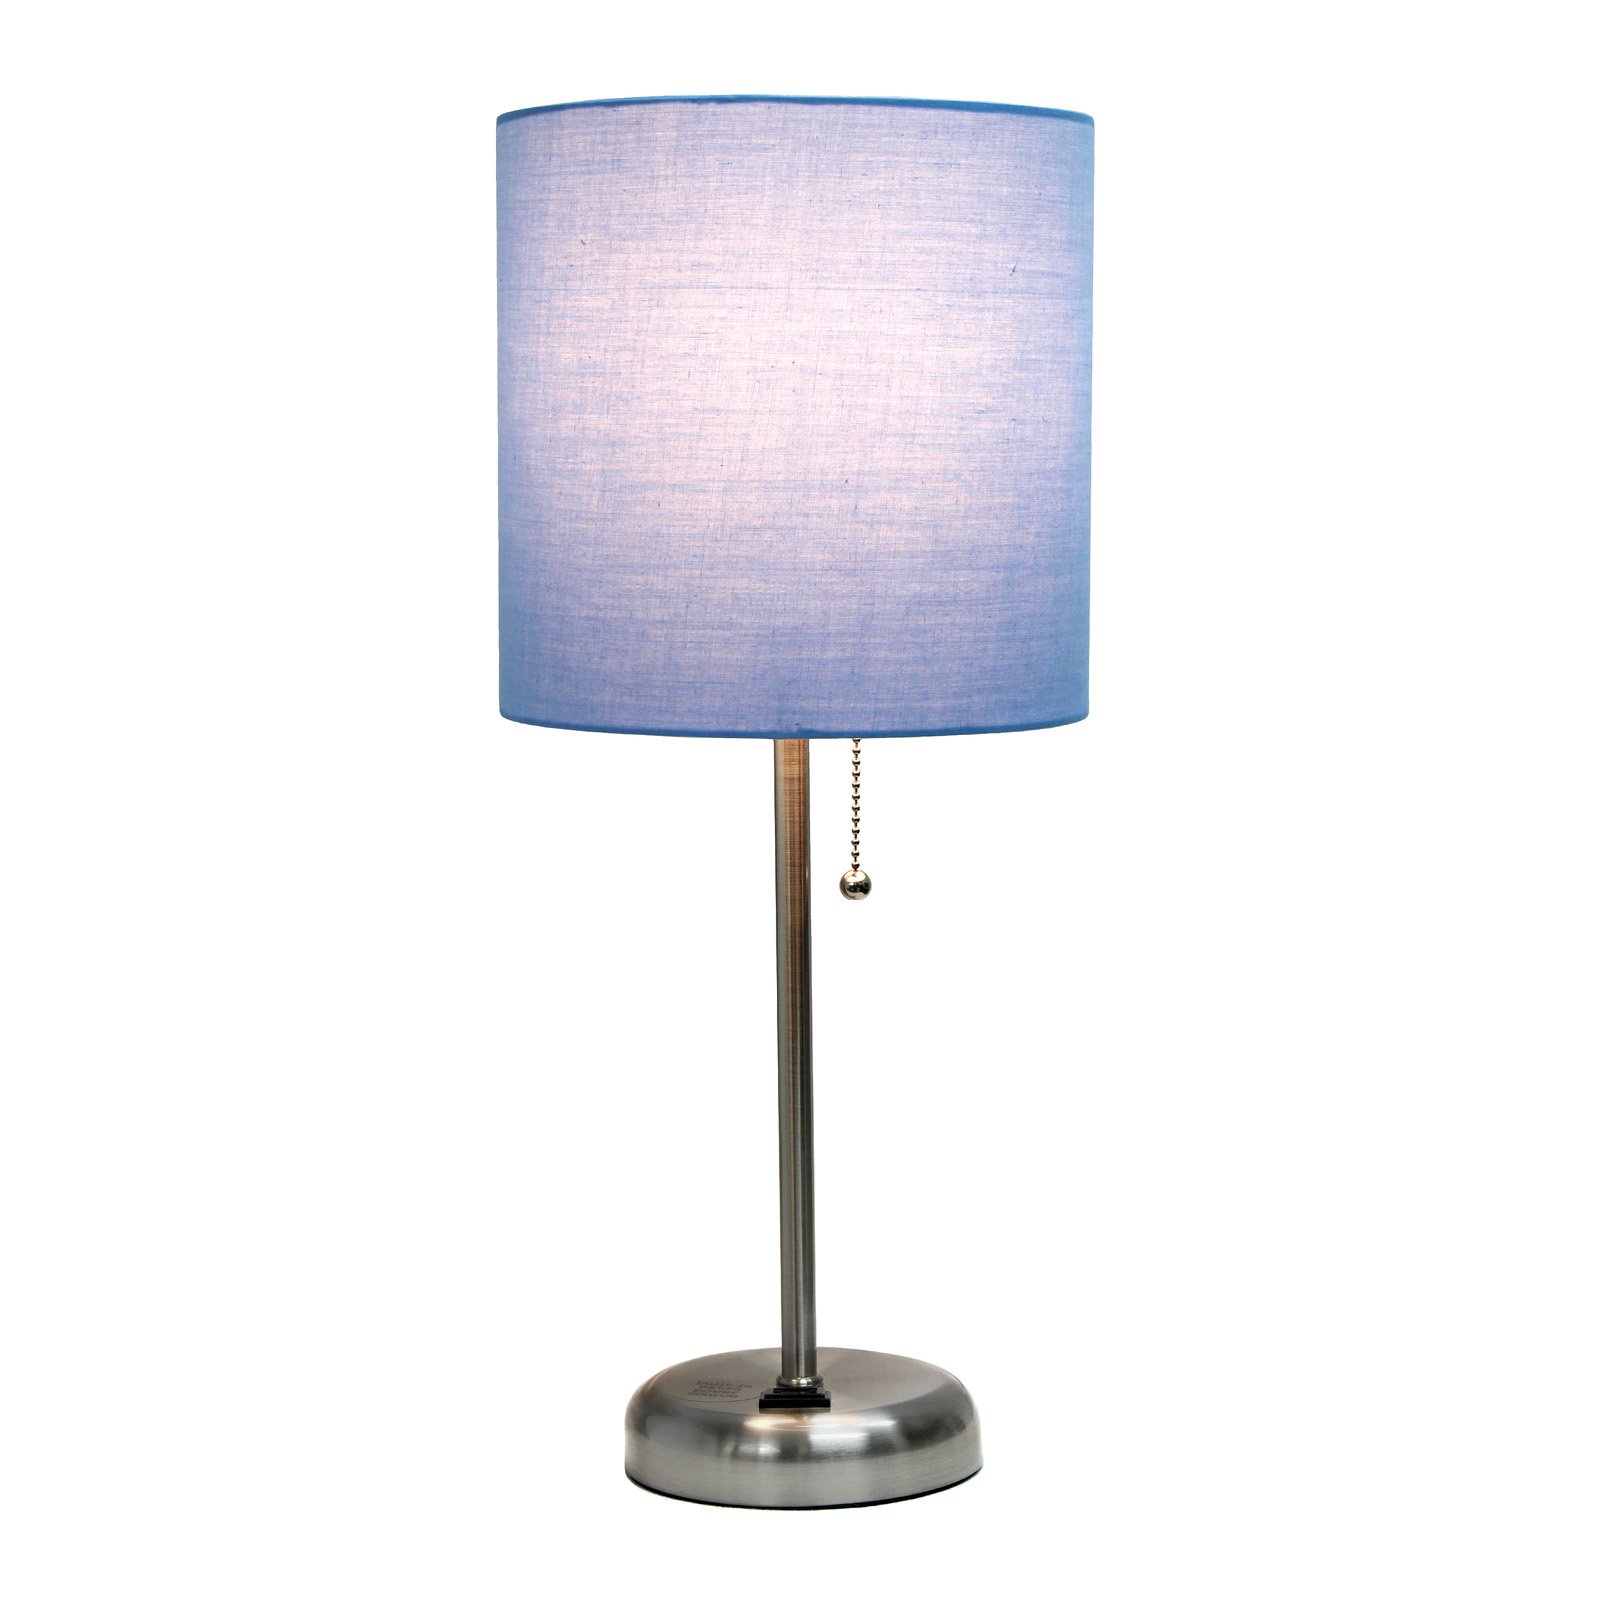 LimeLights Stick Lamp with Charging Outlet and Fabric Shade - Brushed Steel - image 5 of 11